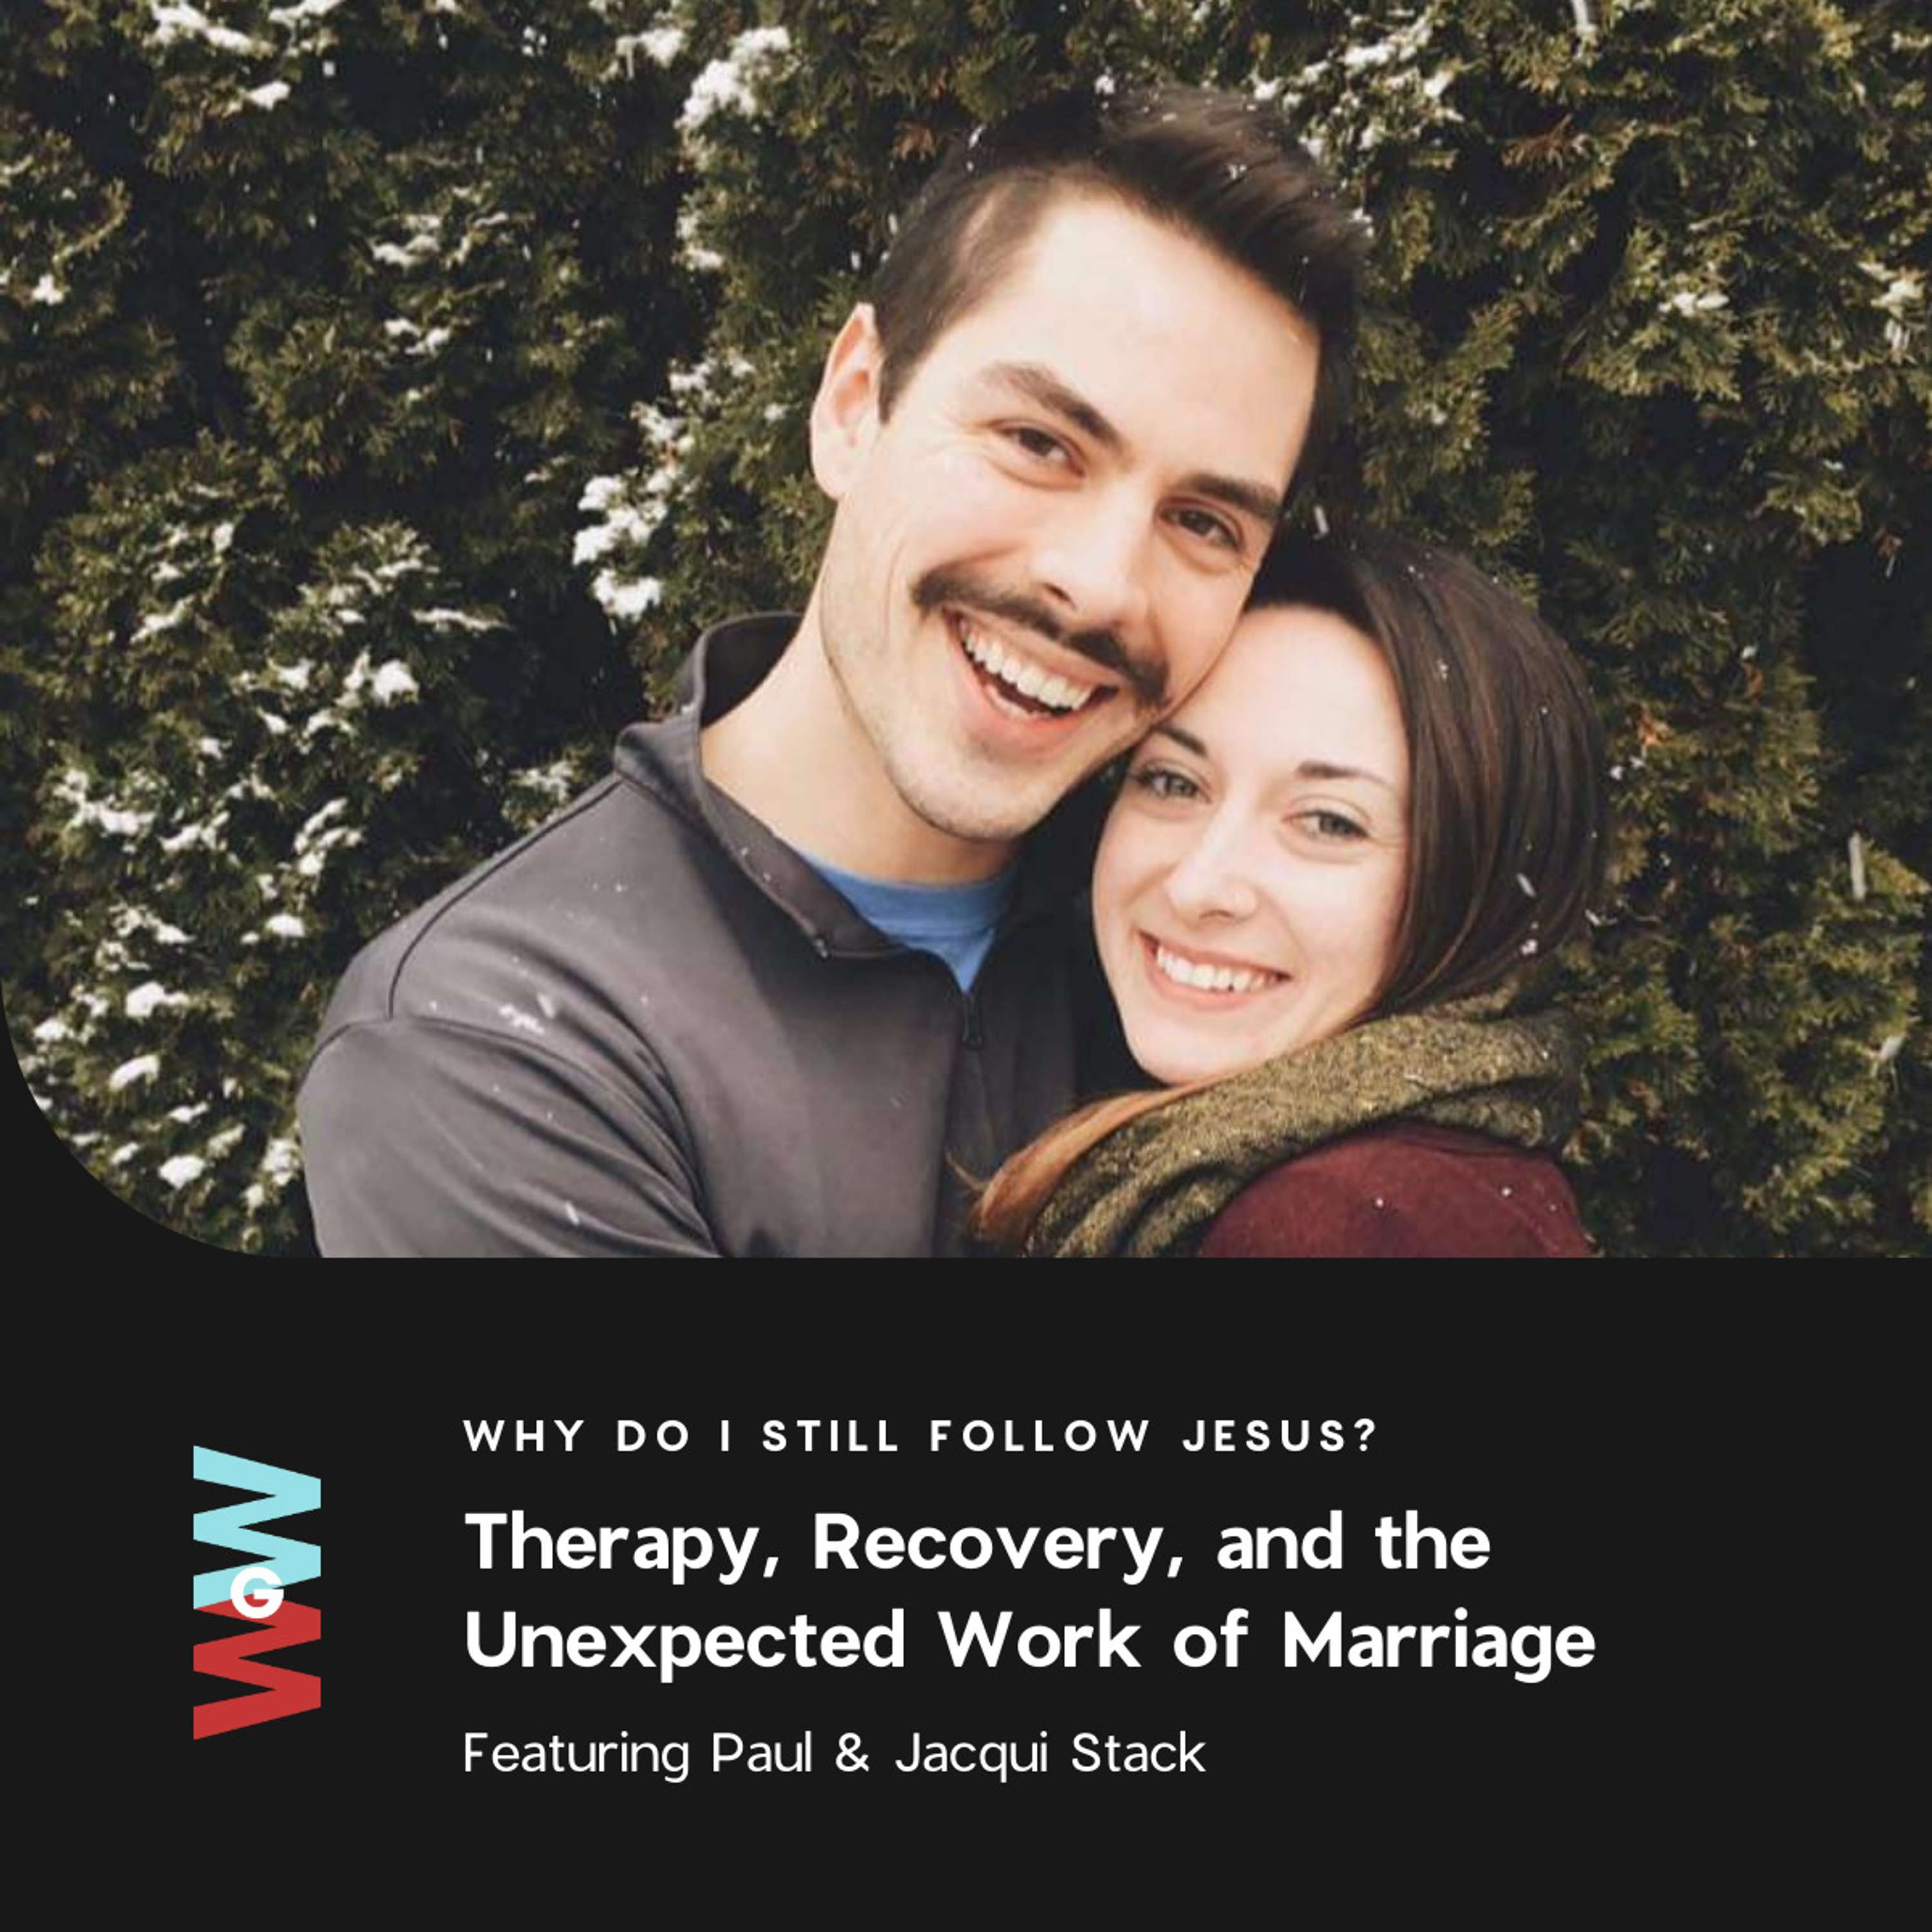 Paul & Jacqui Stack - Why Do I Still Follow Jesus? (Therapy, Recovery, and the Unexpected Work of Marriage)